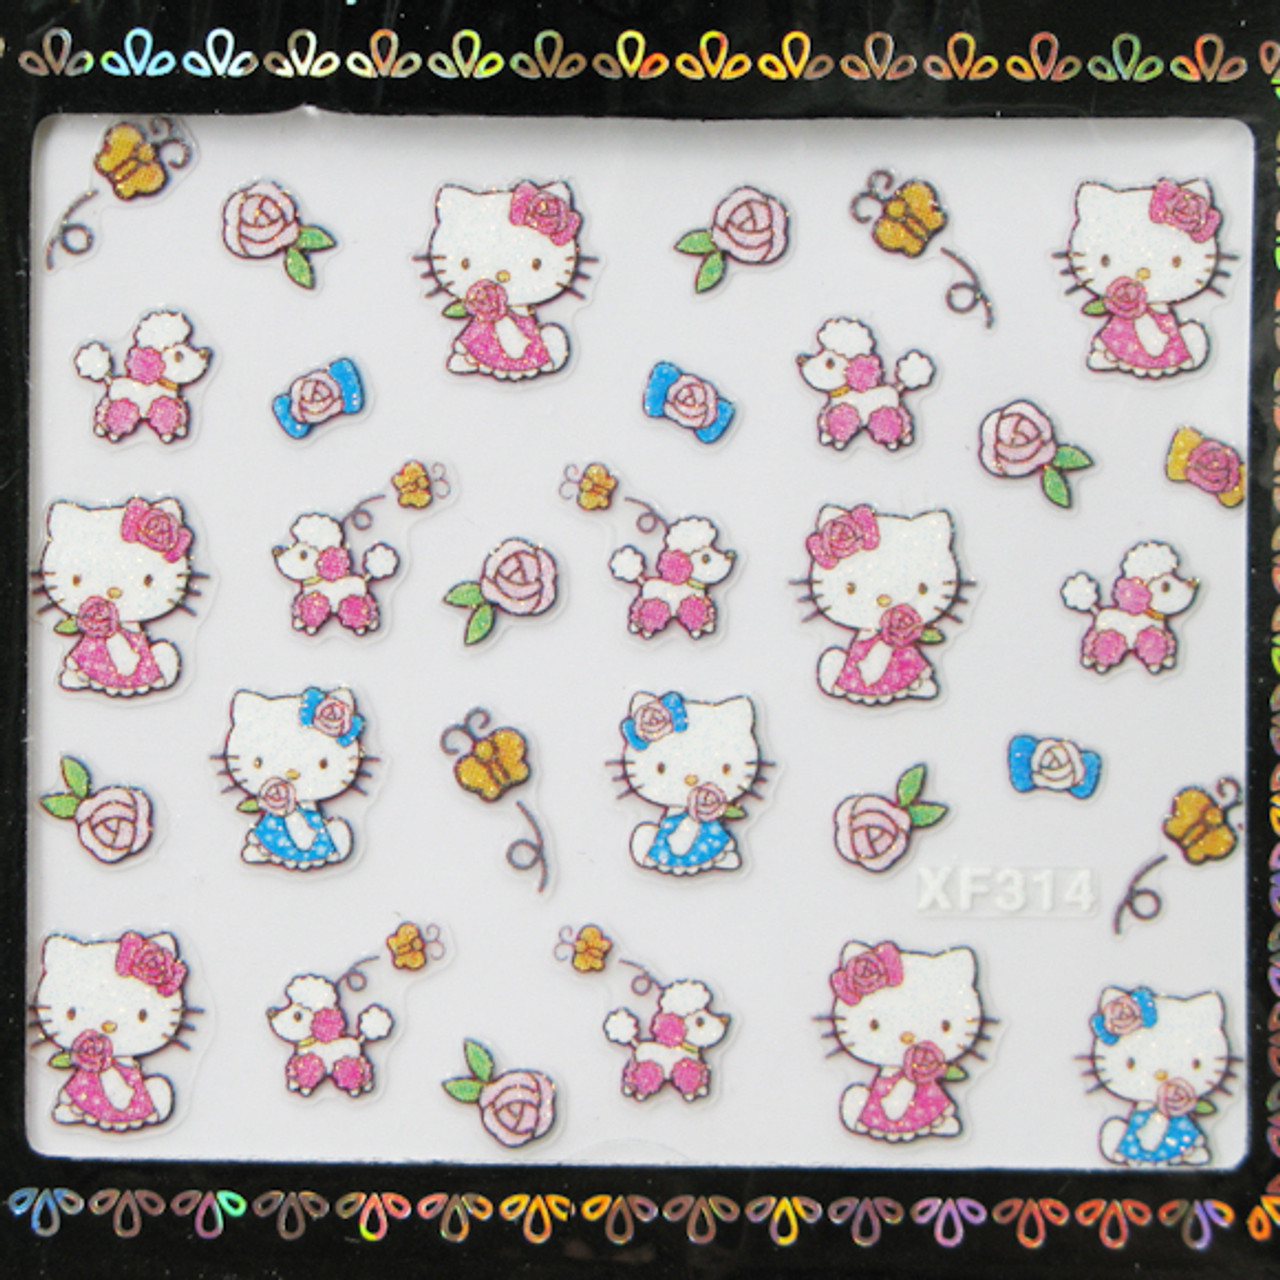 Hello Kitty Bling Jelly Stickers (Per Sheet)